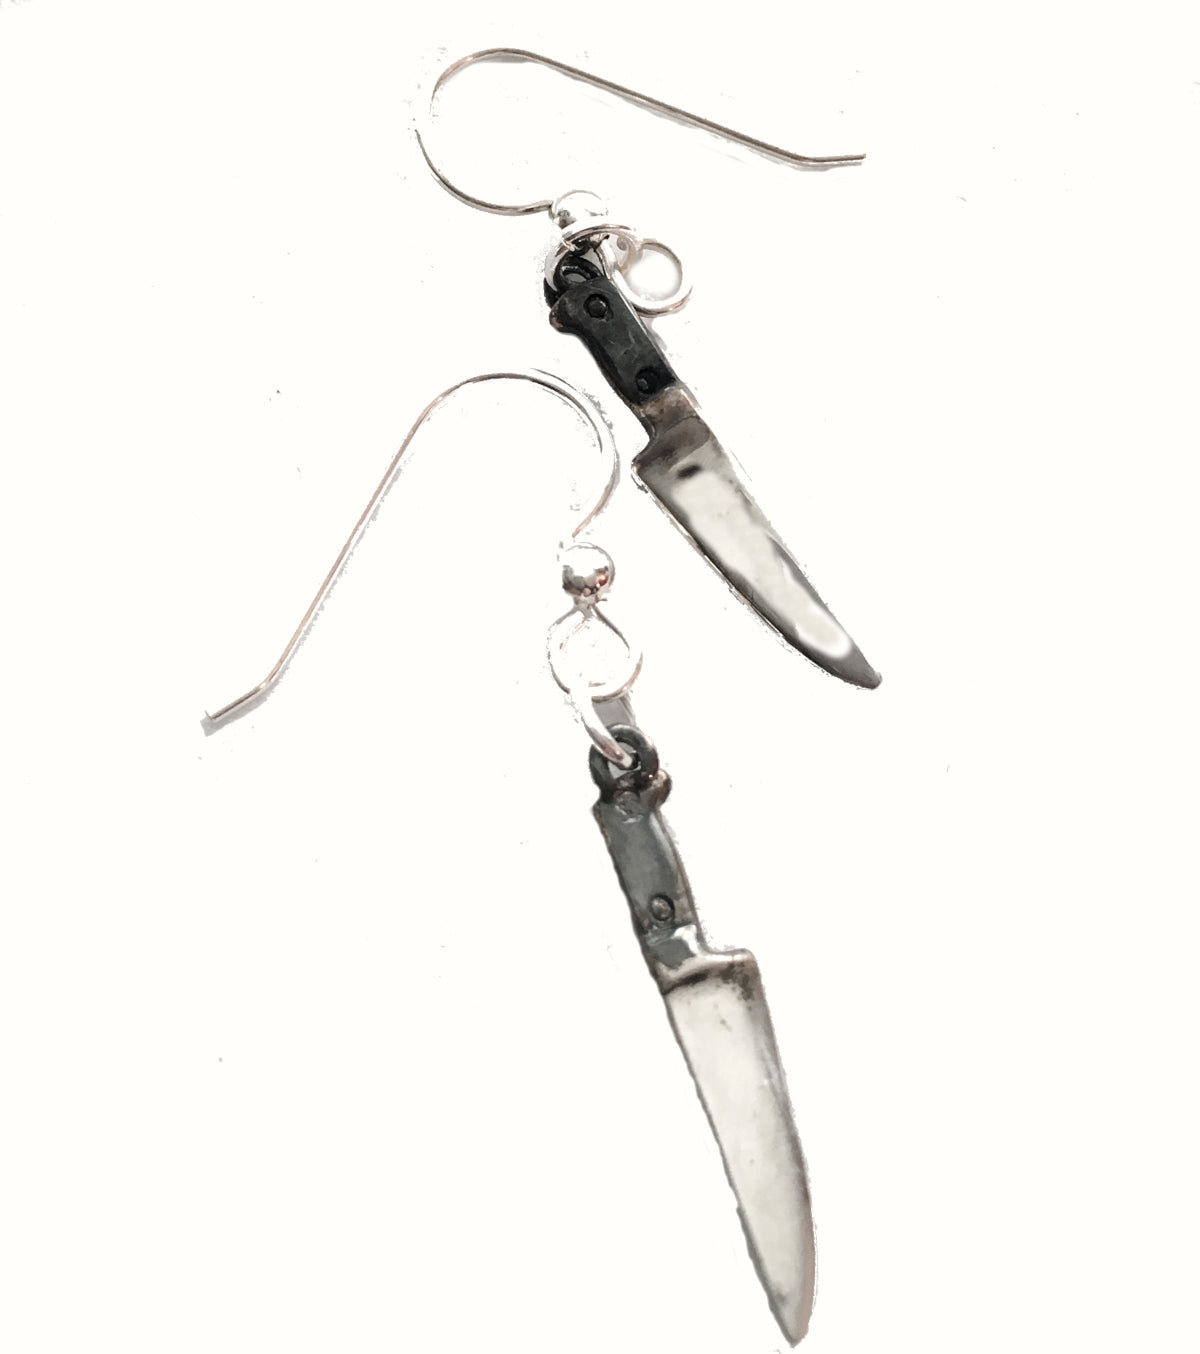 Chef Knife Dangle Earrings with Black Handles in Sterling Silver